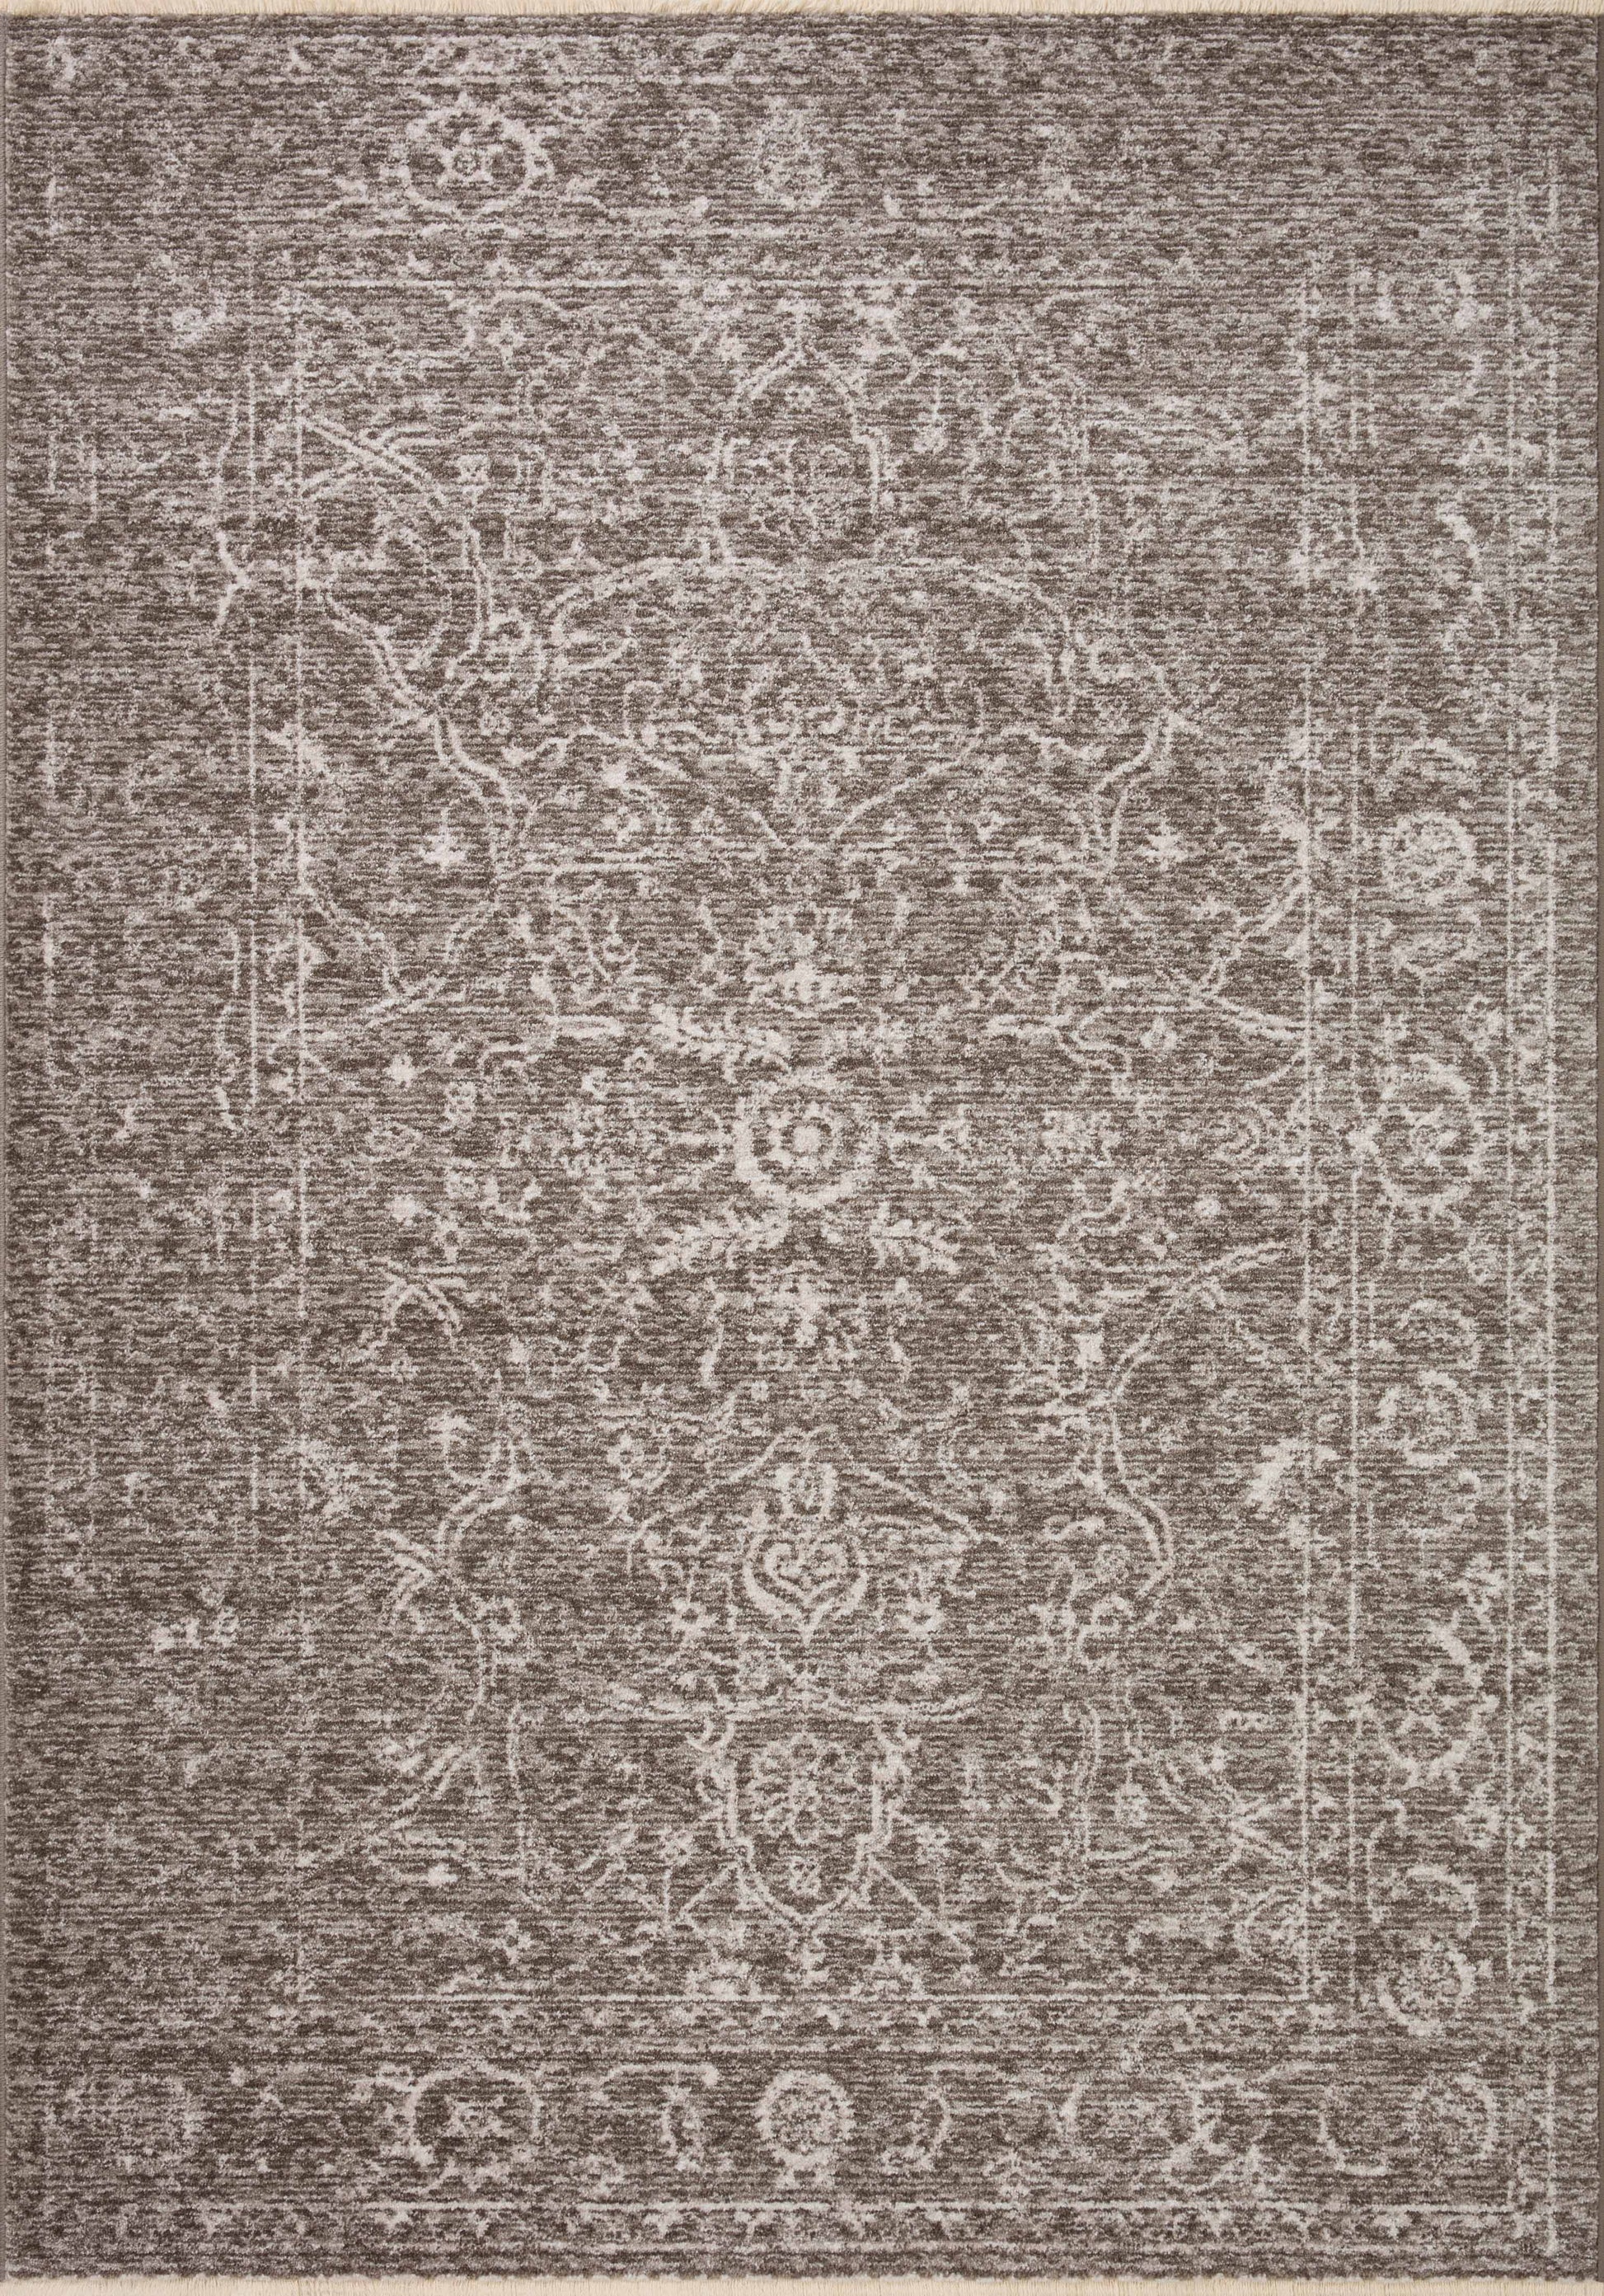 A picture of Loloi's Vance rug, in style VAN-08, color Taupe / Dove